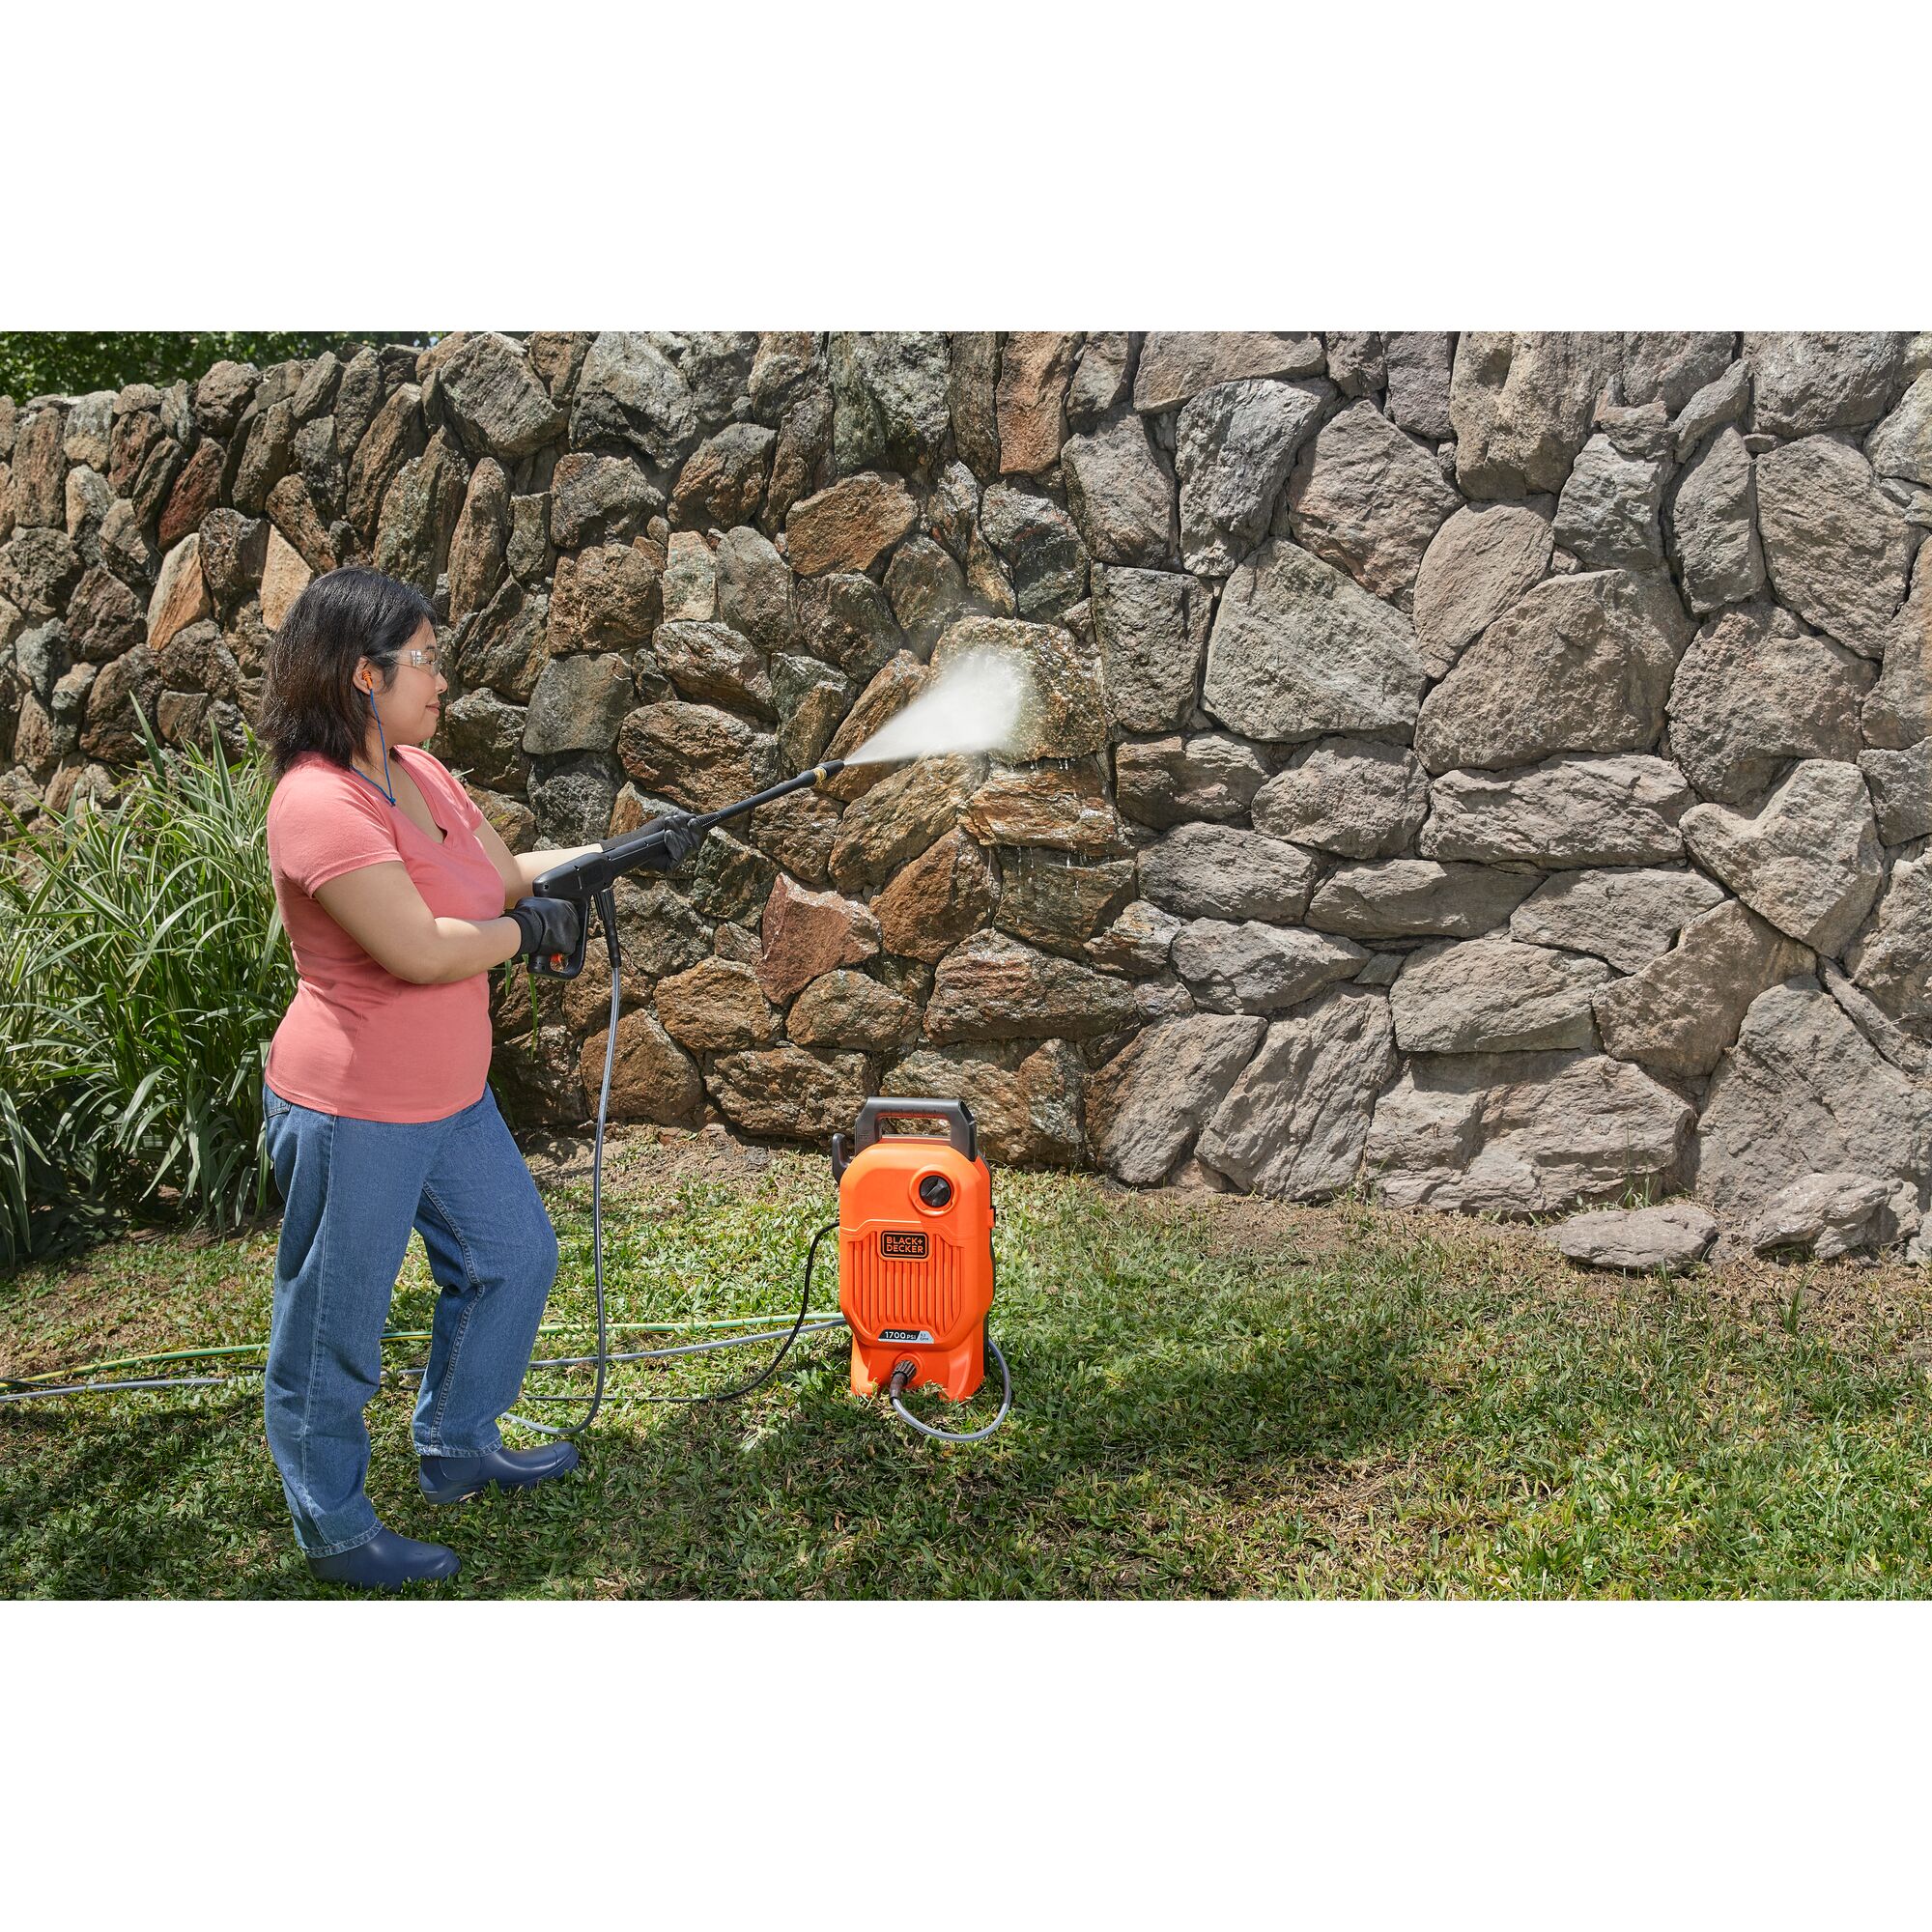 Woman using BLACK+DECKER 1,700 MAX psi* pressure washer with the turbo nozzle to clean a dirty stone wall